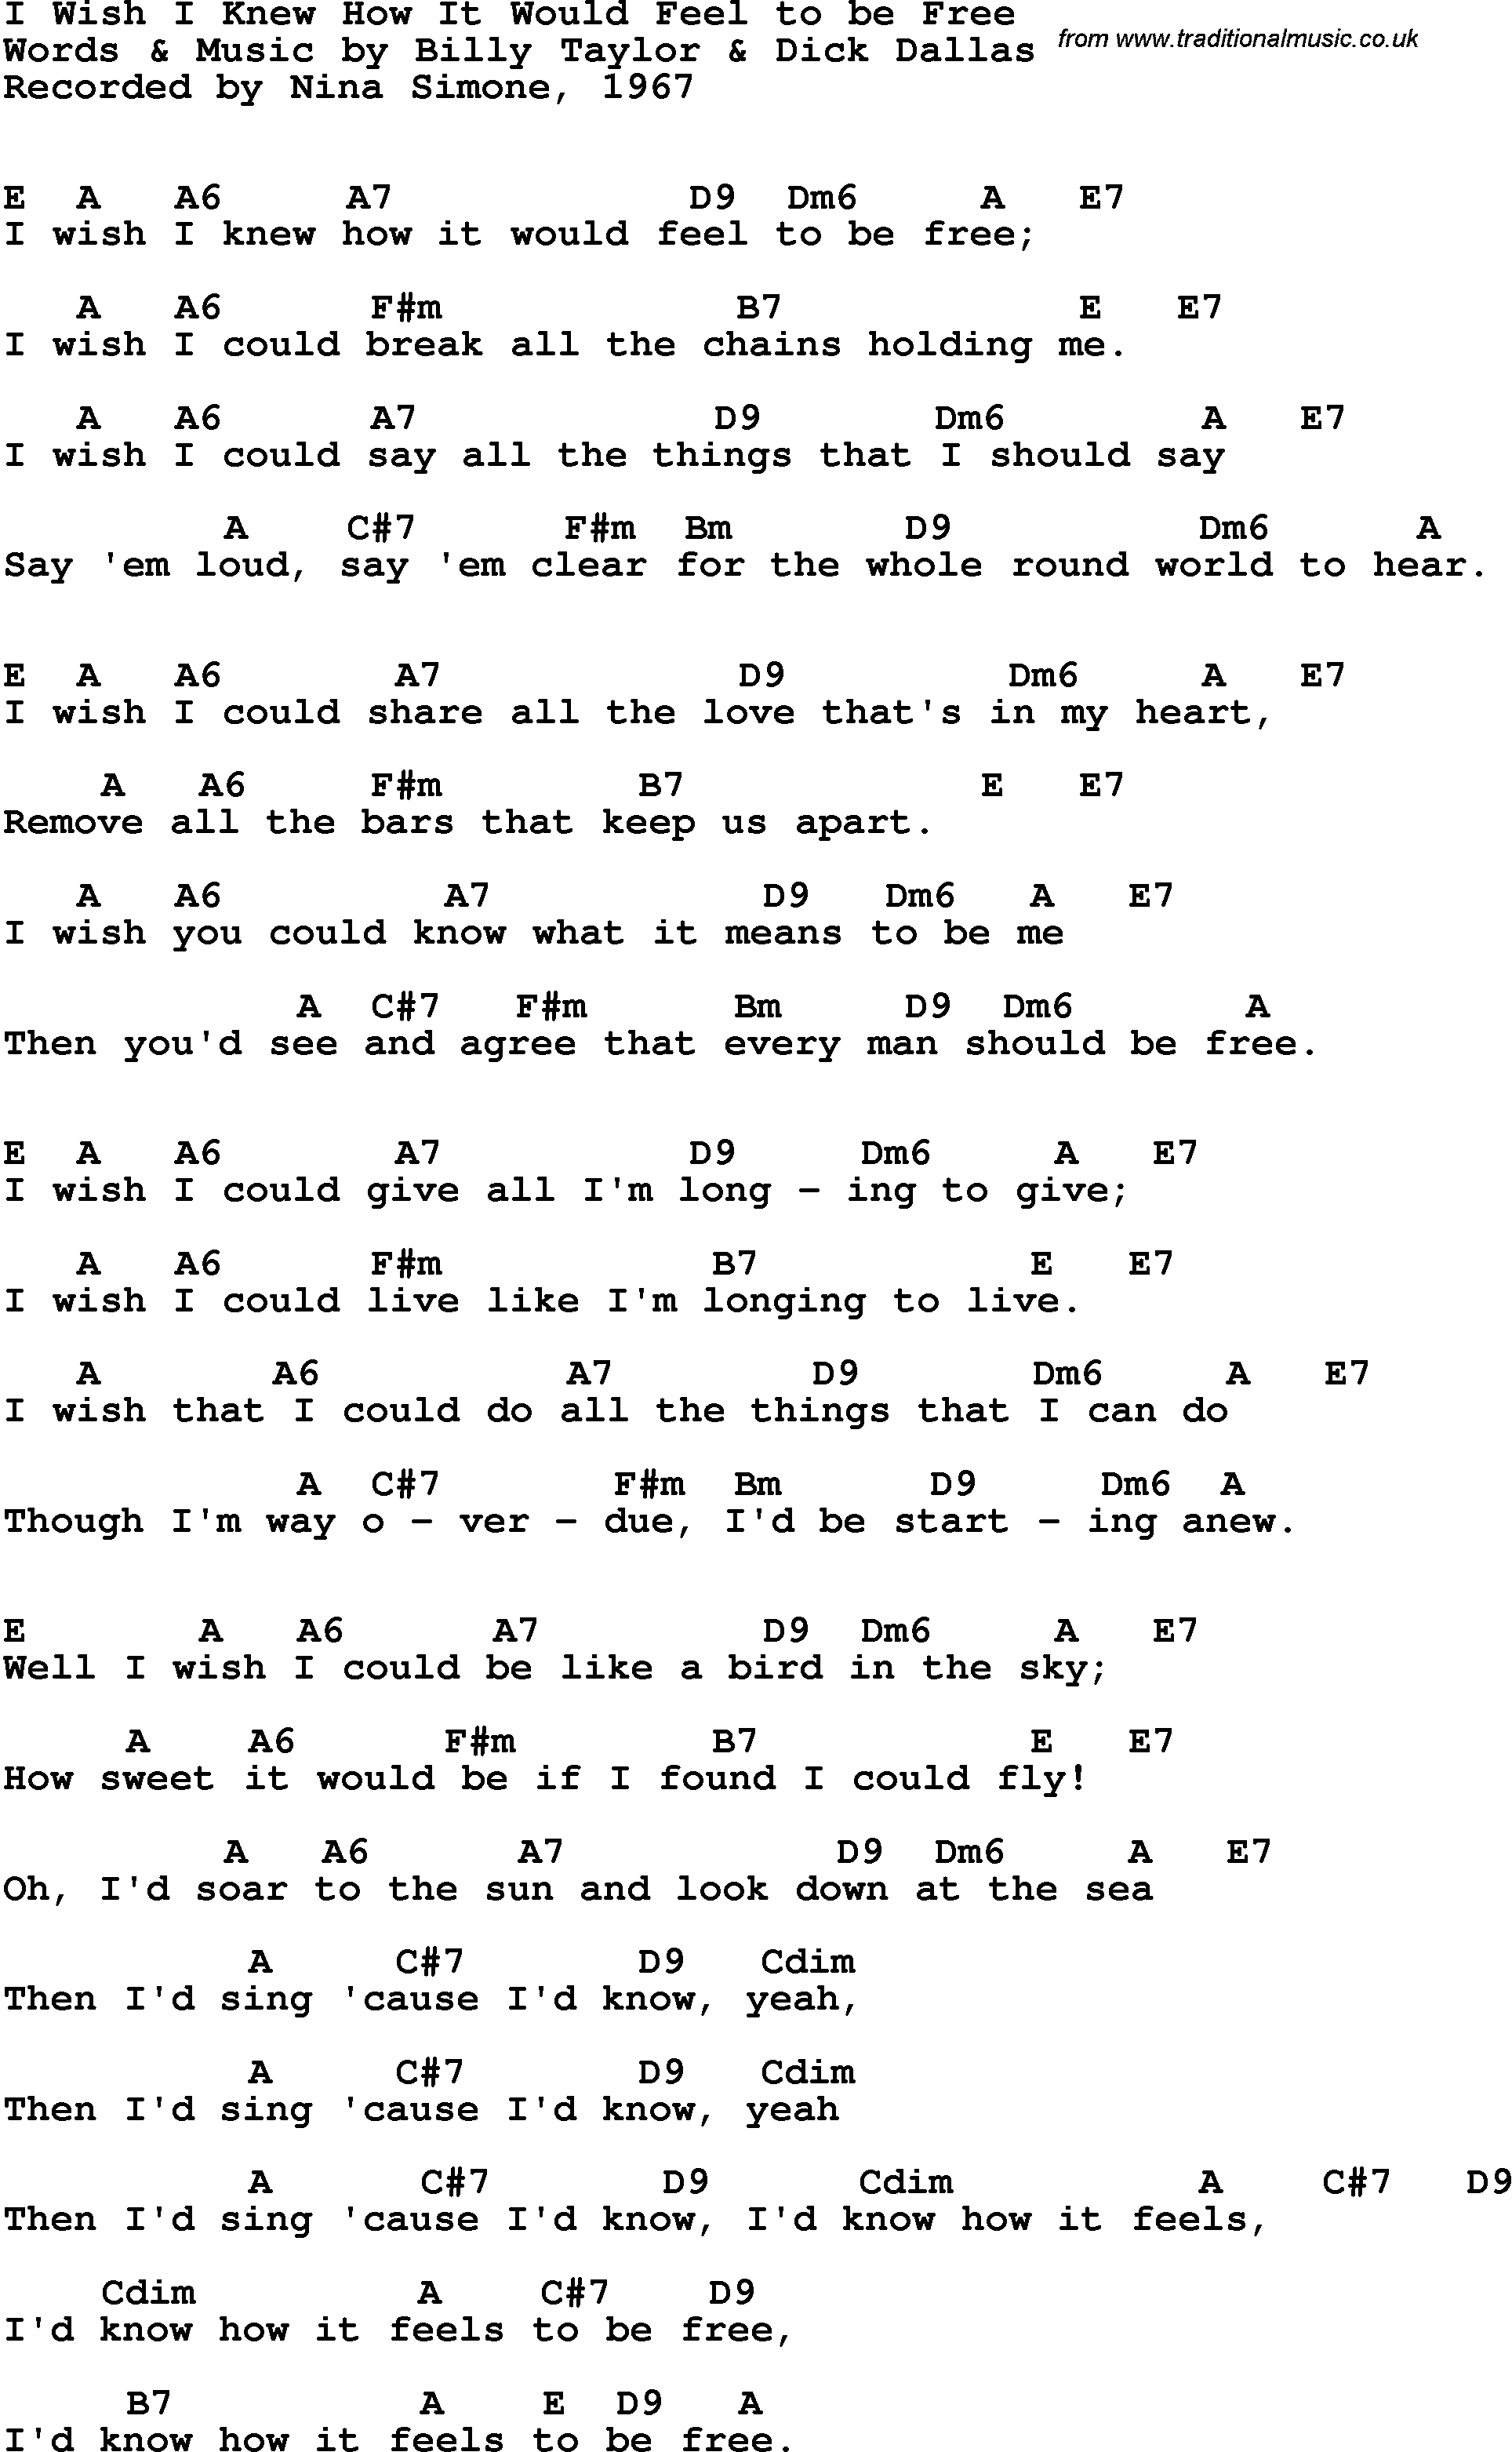 Song Lyrics with guitar chords for I Wish I Knew How It Would Feel To Be Free - Nina Simone, 1967